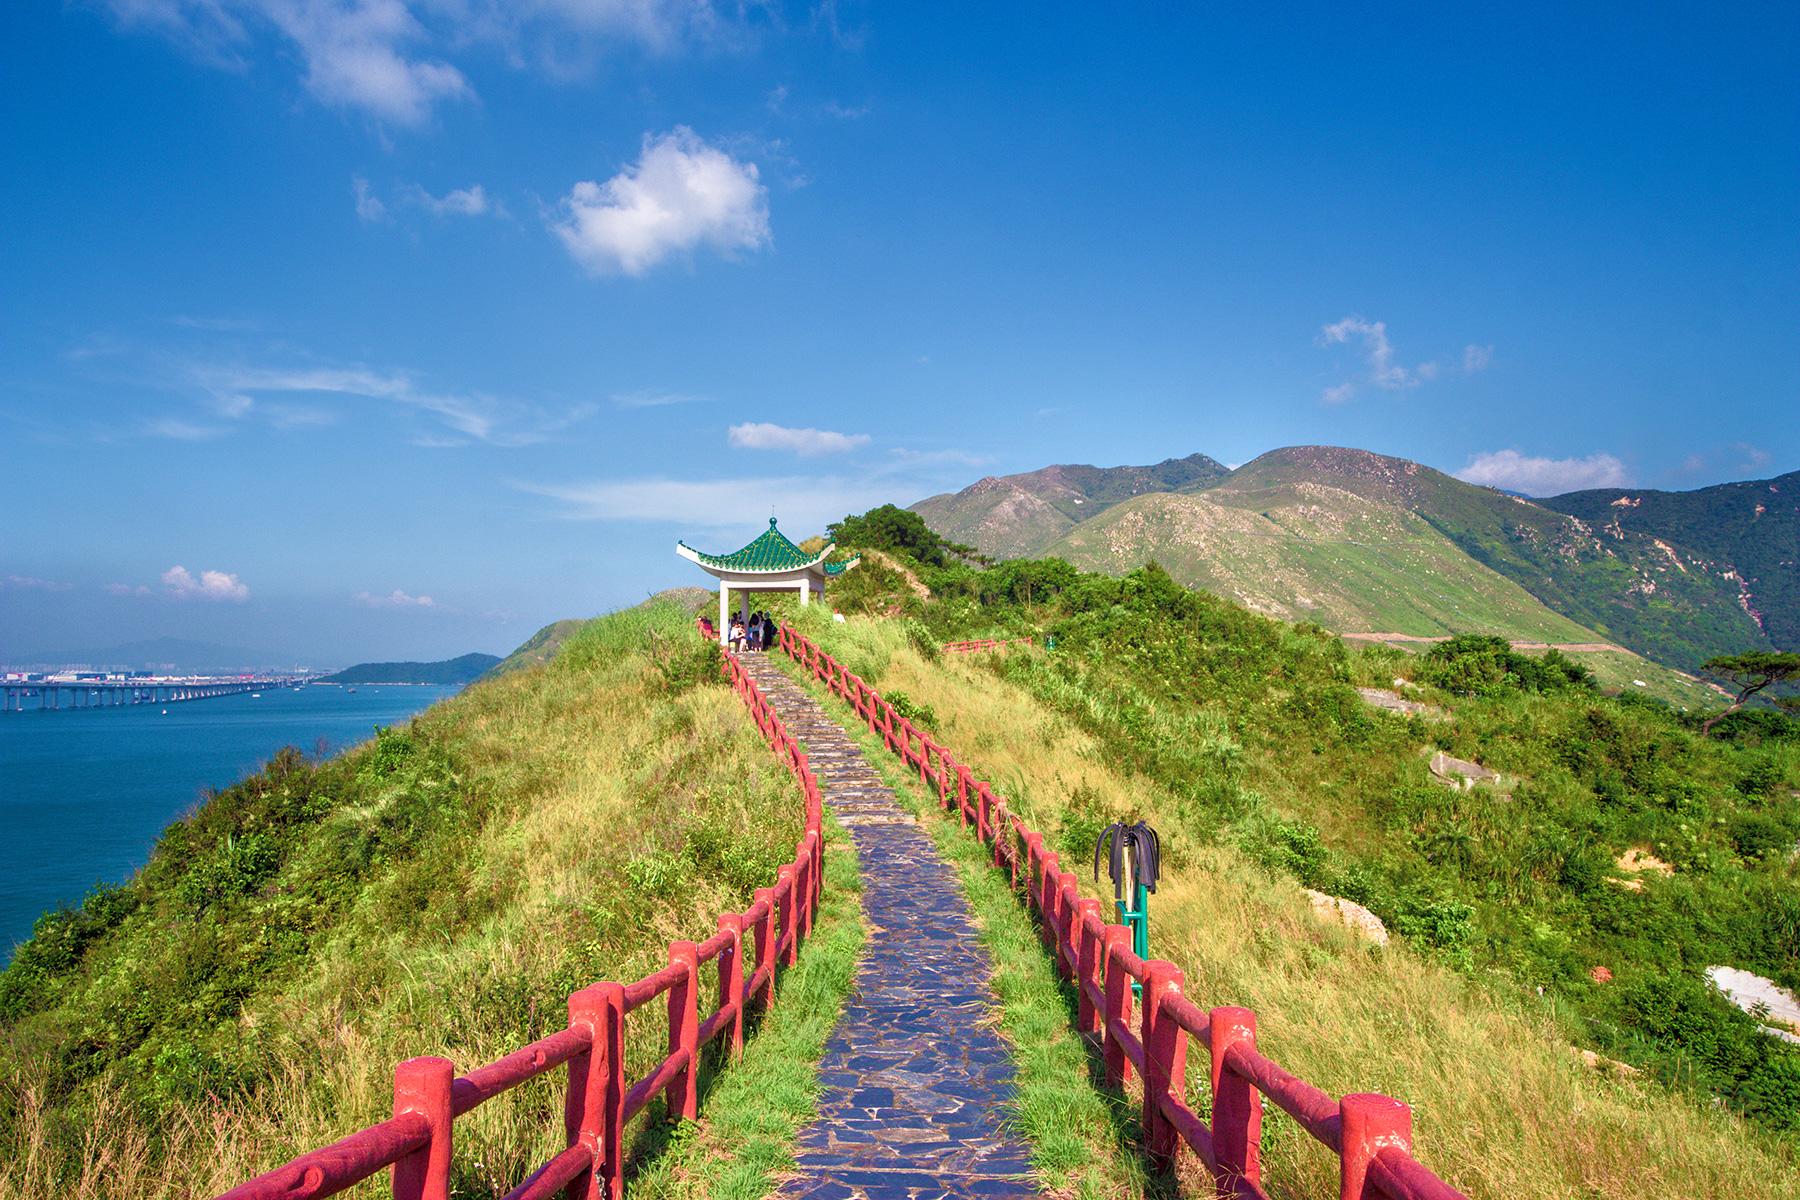 Parks, Mountains, Beaches, and More Nature in Hong Kong